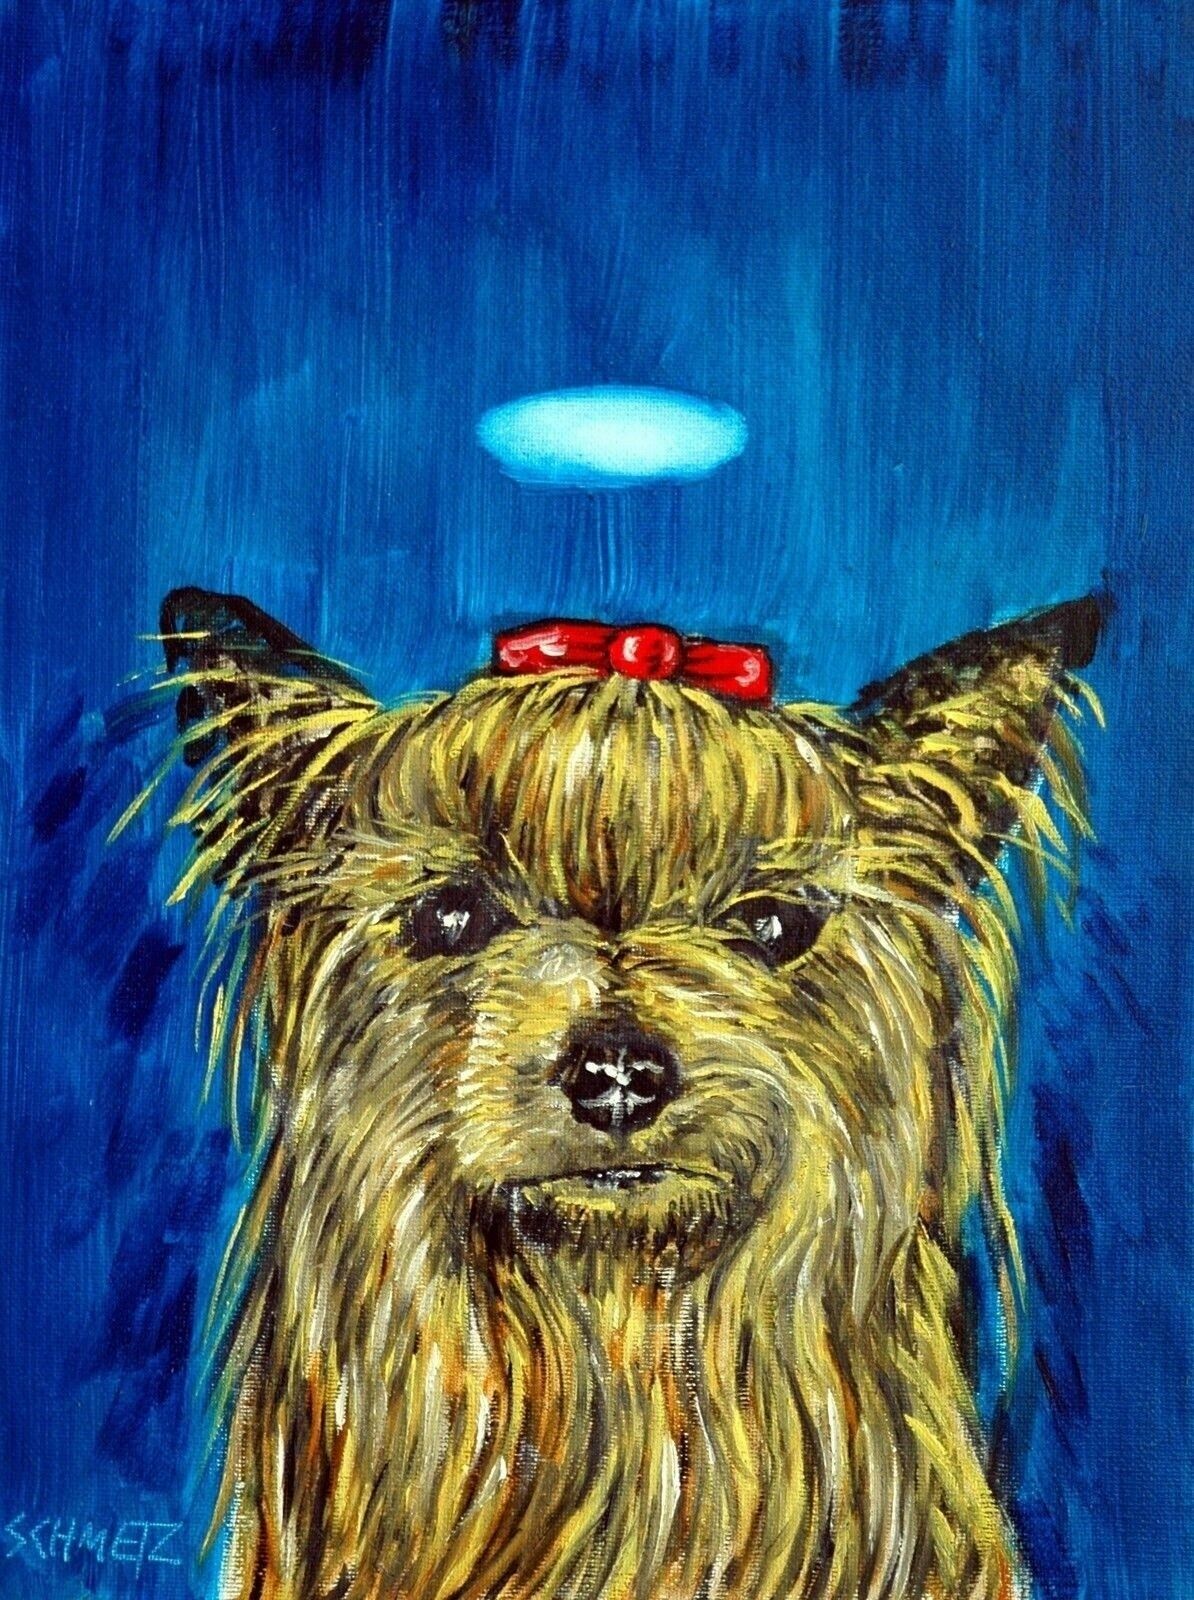 Yorkie Yorkshire Terrier Dog Angel Art  From Painting 13x19 Glossy Photo Glossy